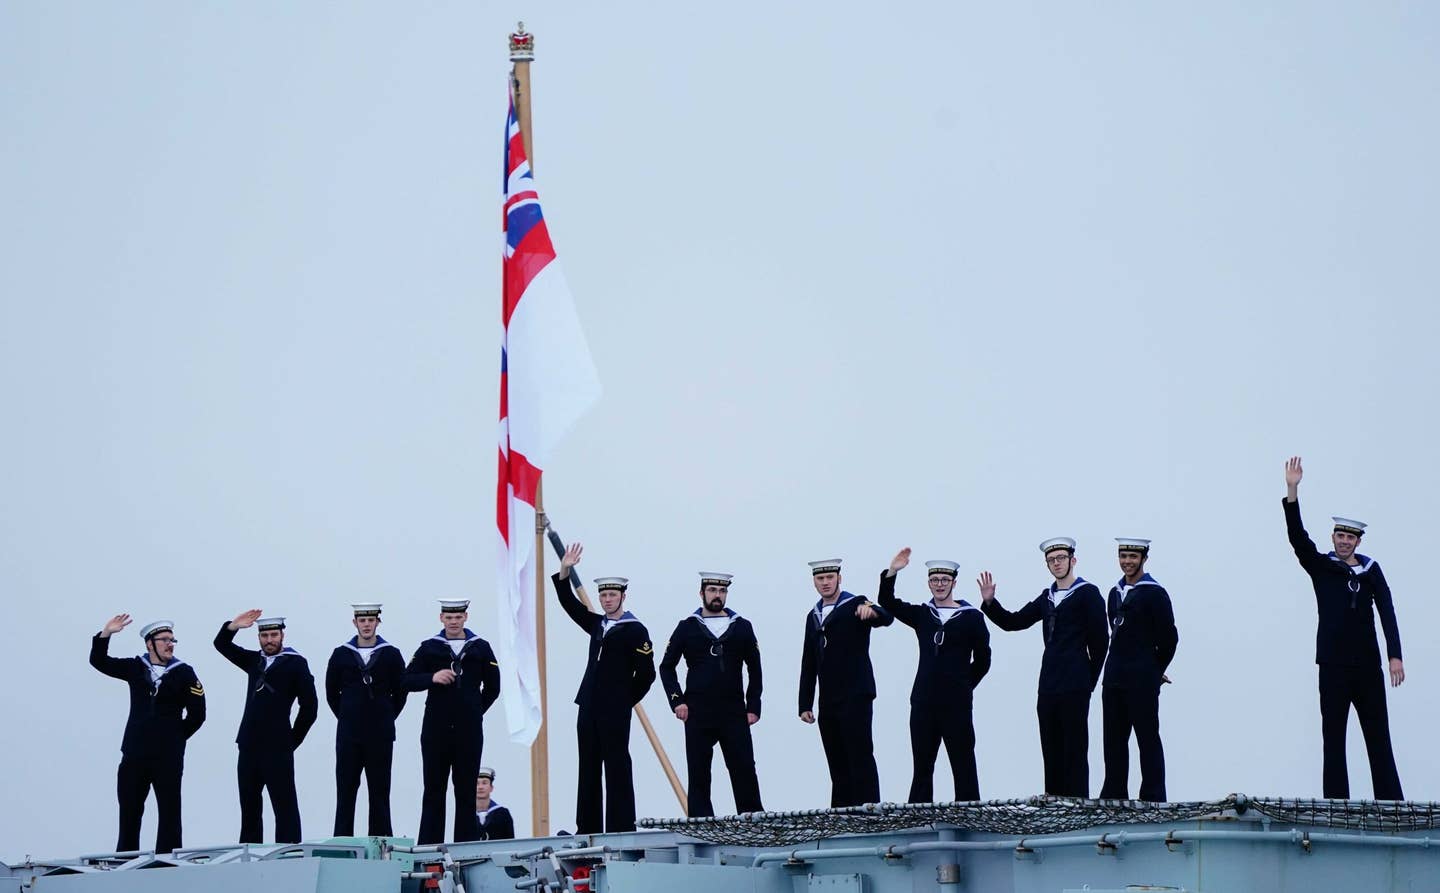 Sailors on board wave towards the Round Tower as the Royal Navy's aircraft carrier HMS Queen Elizabeth returns to Portsmouth Naval Base following her deployment to the Far East, December 9, 2021. <em>Photo by Andrew Matthews/PA Images via Getty Images</em>